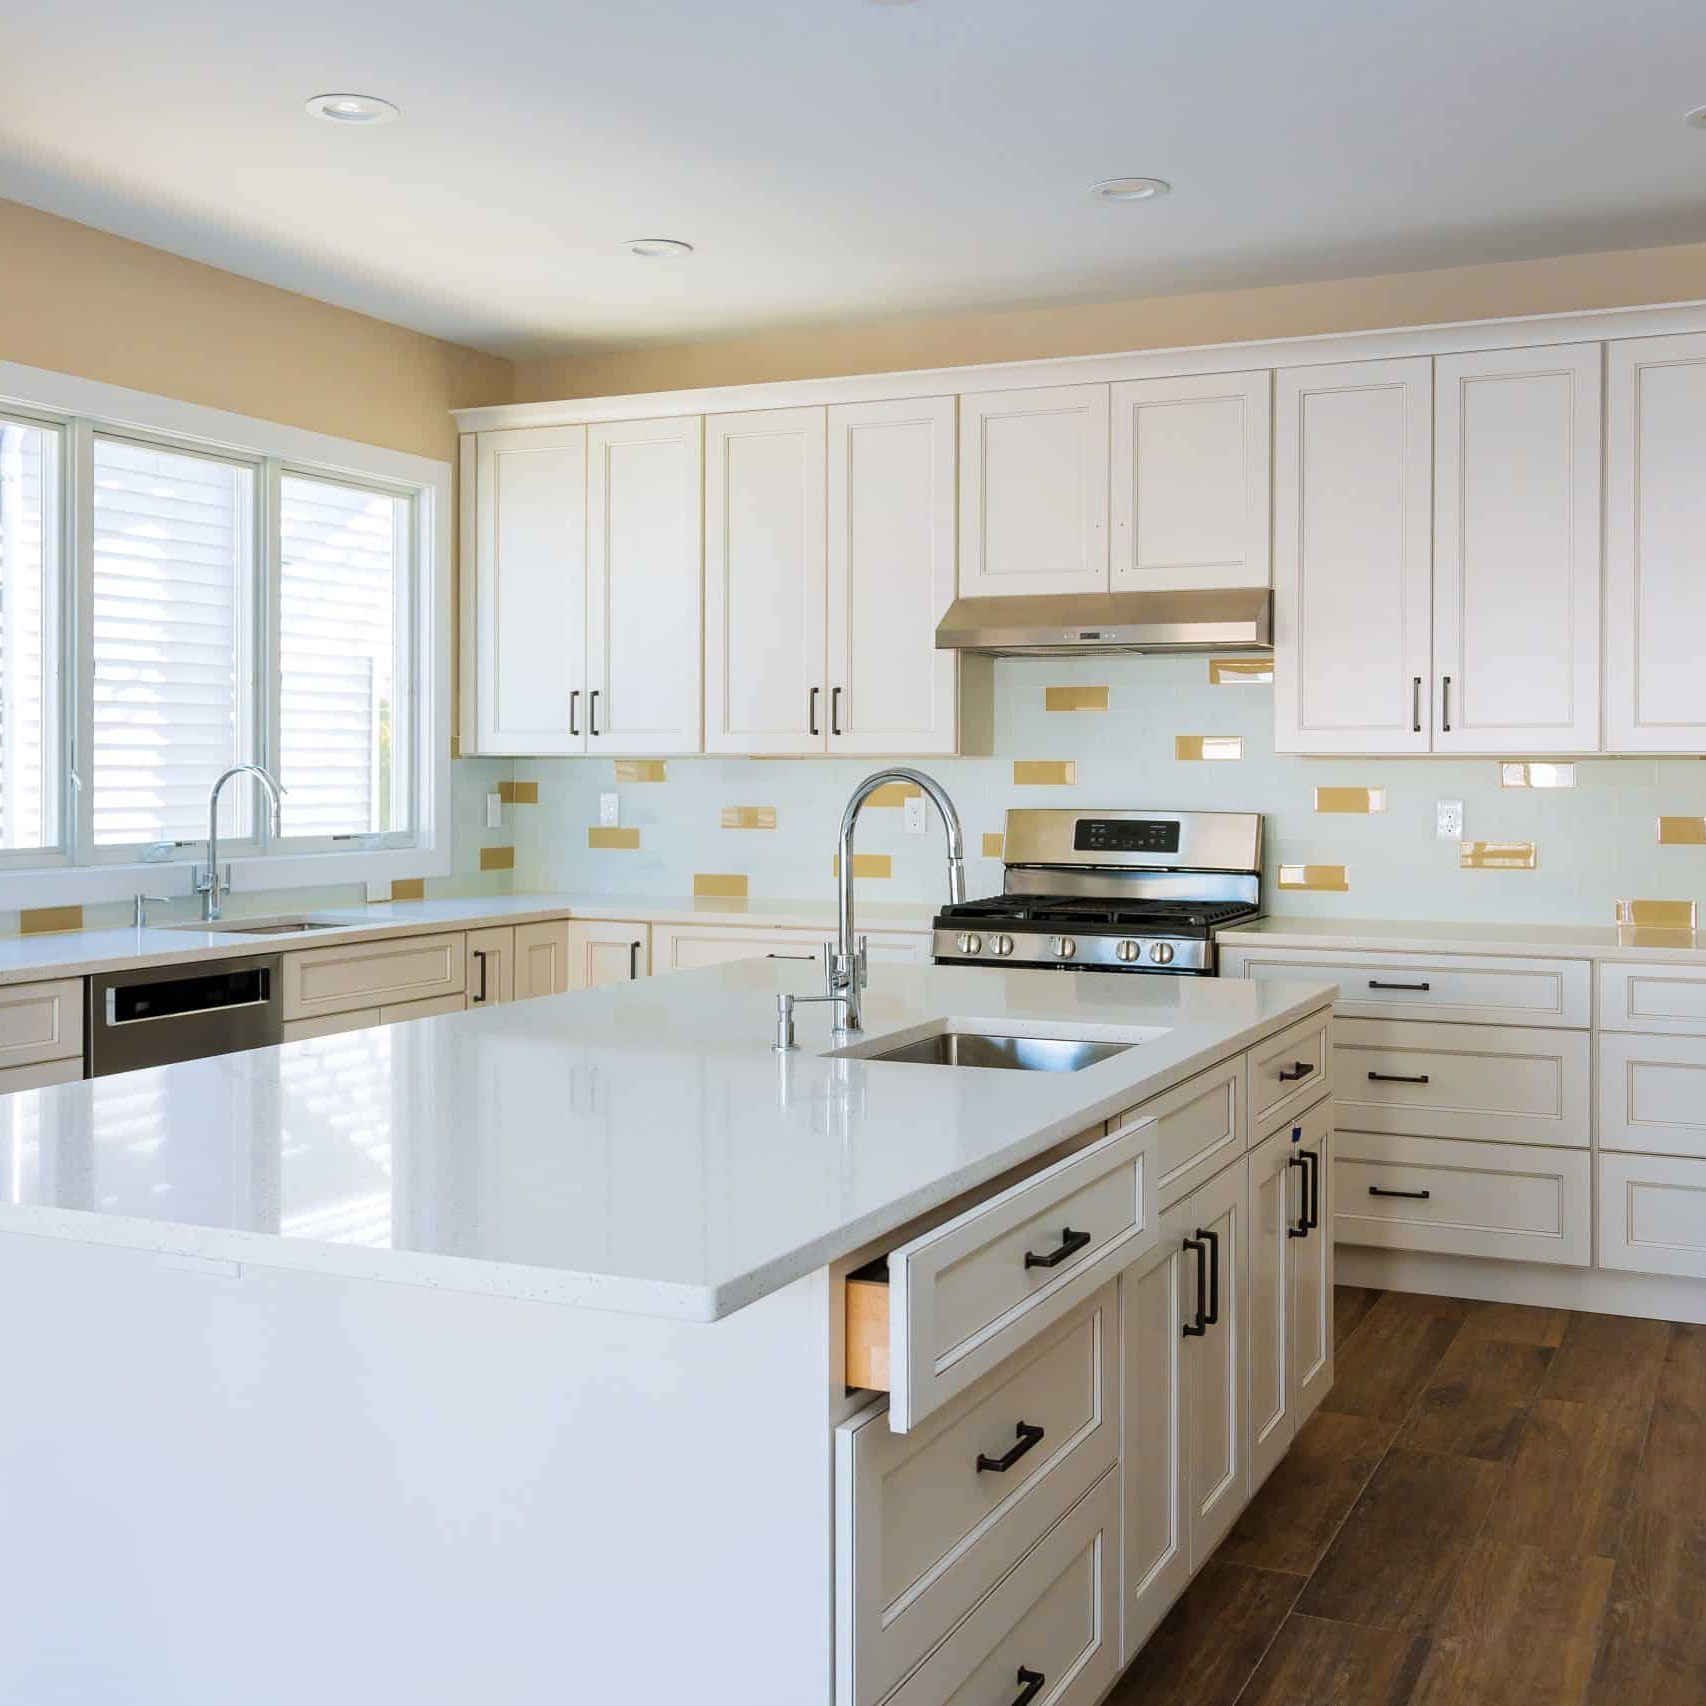 Installing cabinets and counter top in a white kitchen partially installed furniture.